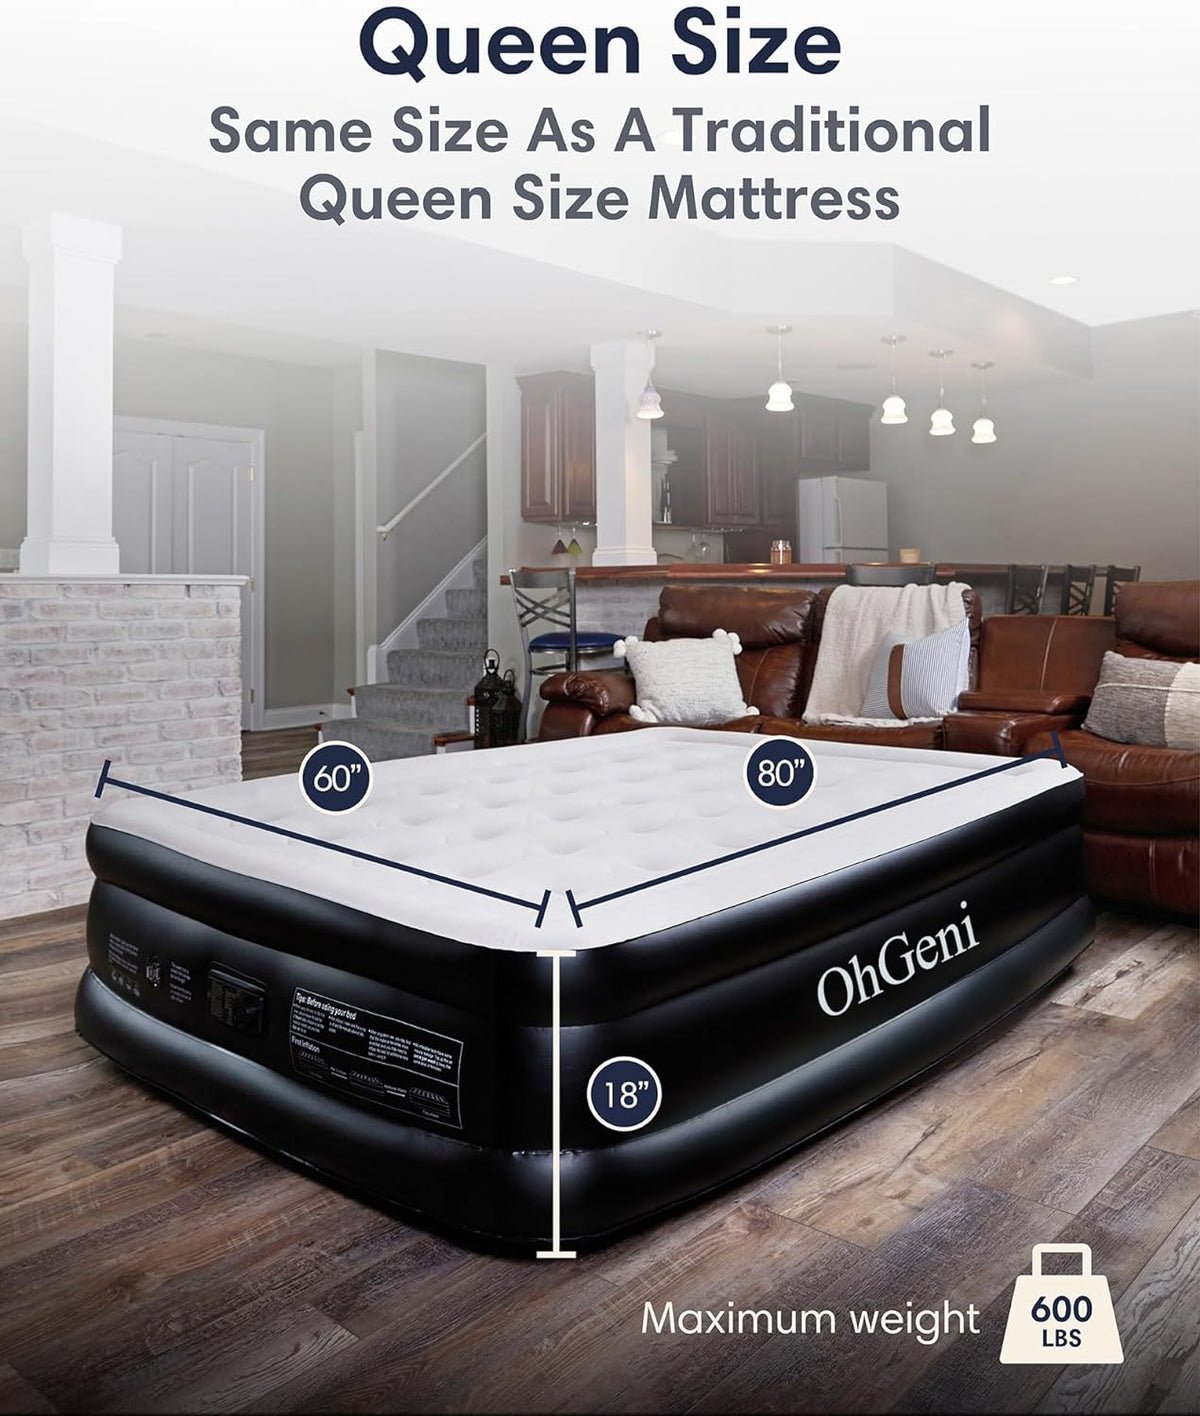 Queen Air Mattress |18" |OhGeni - aborderproducts